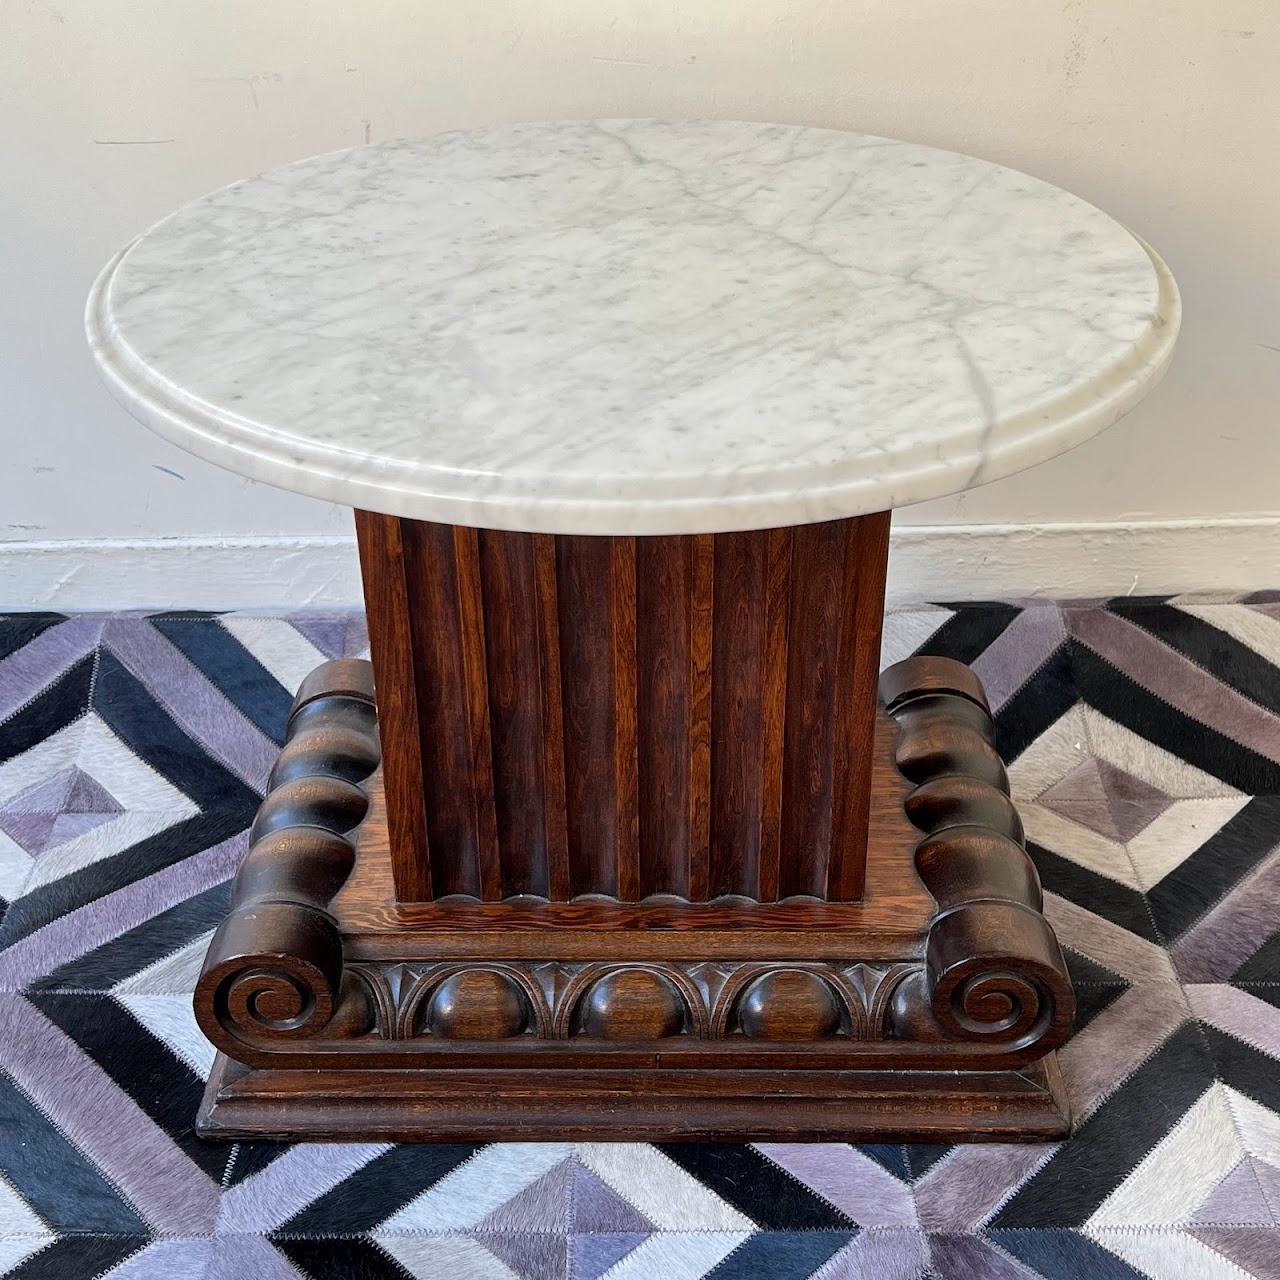 Fluted Pillar Base Accent Table